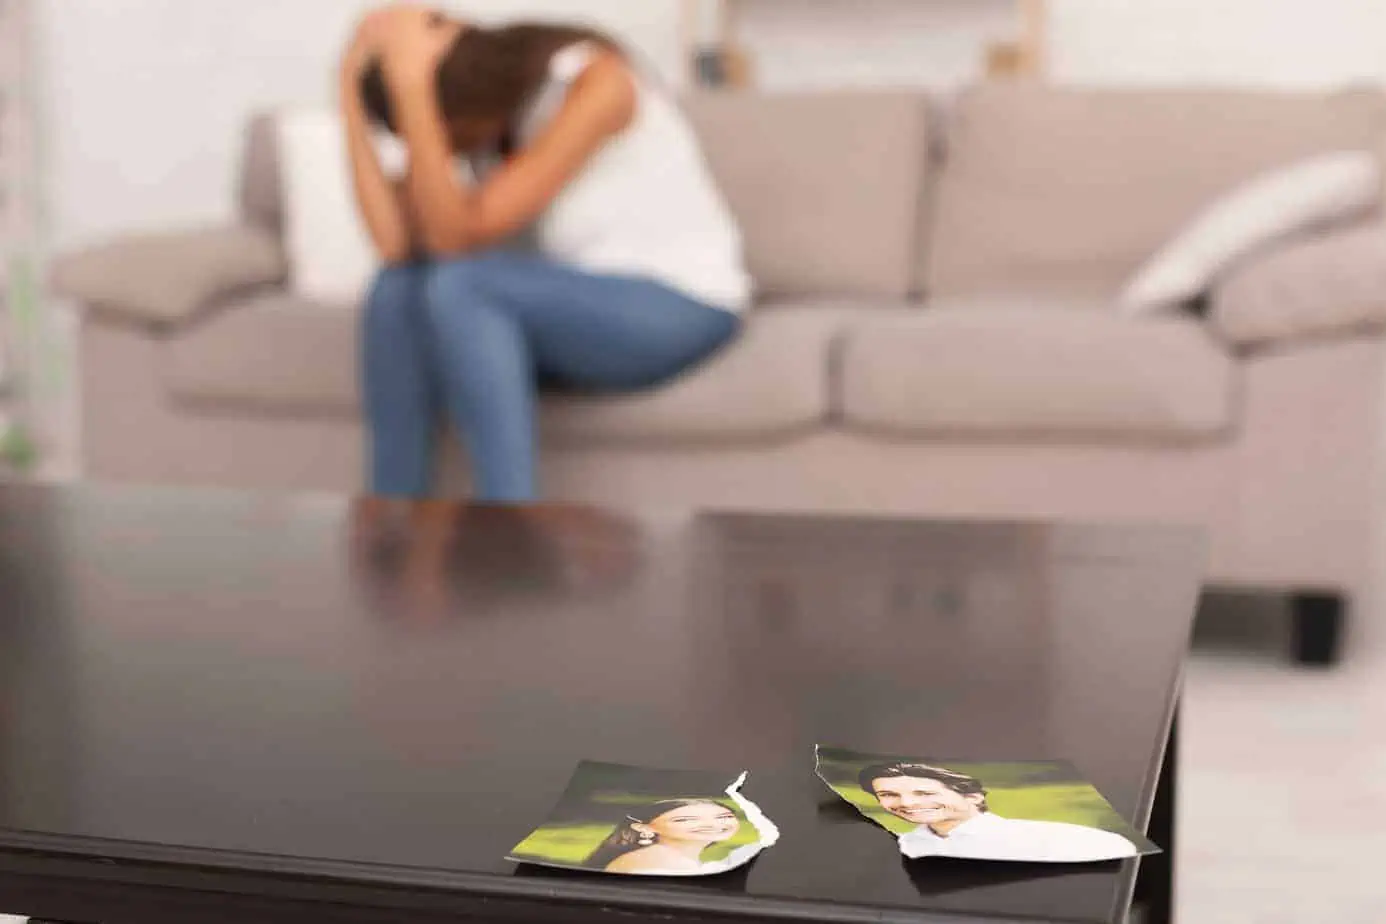 A woman sitting on a couch in front of a coffee table